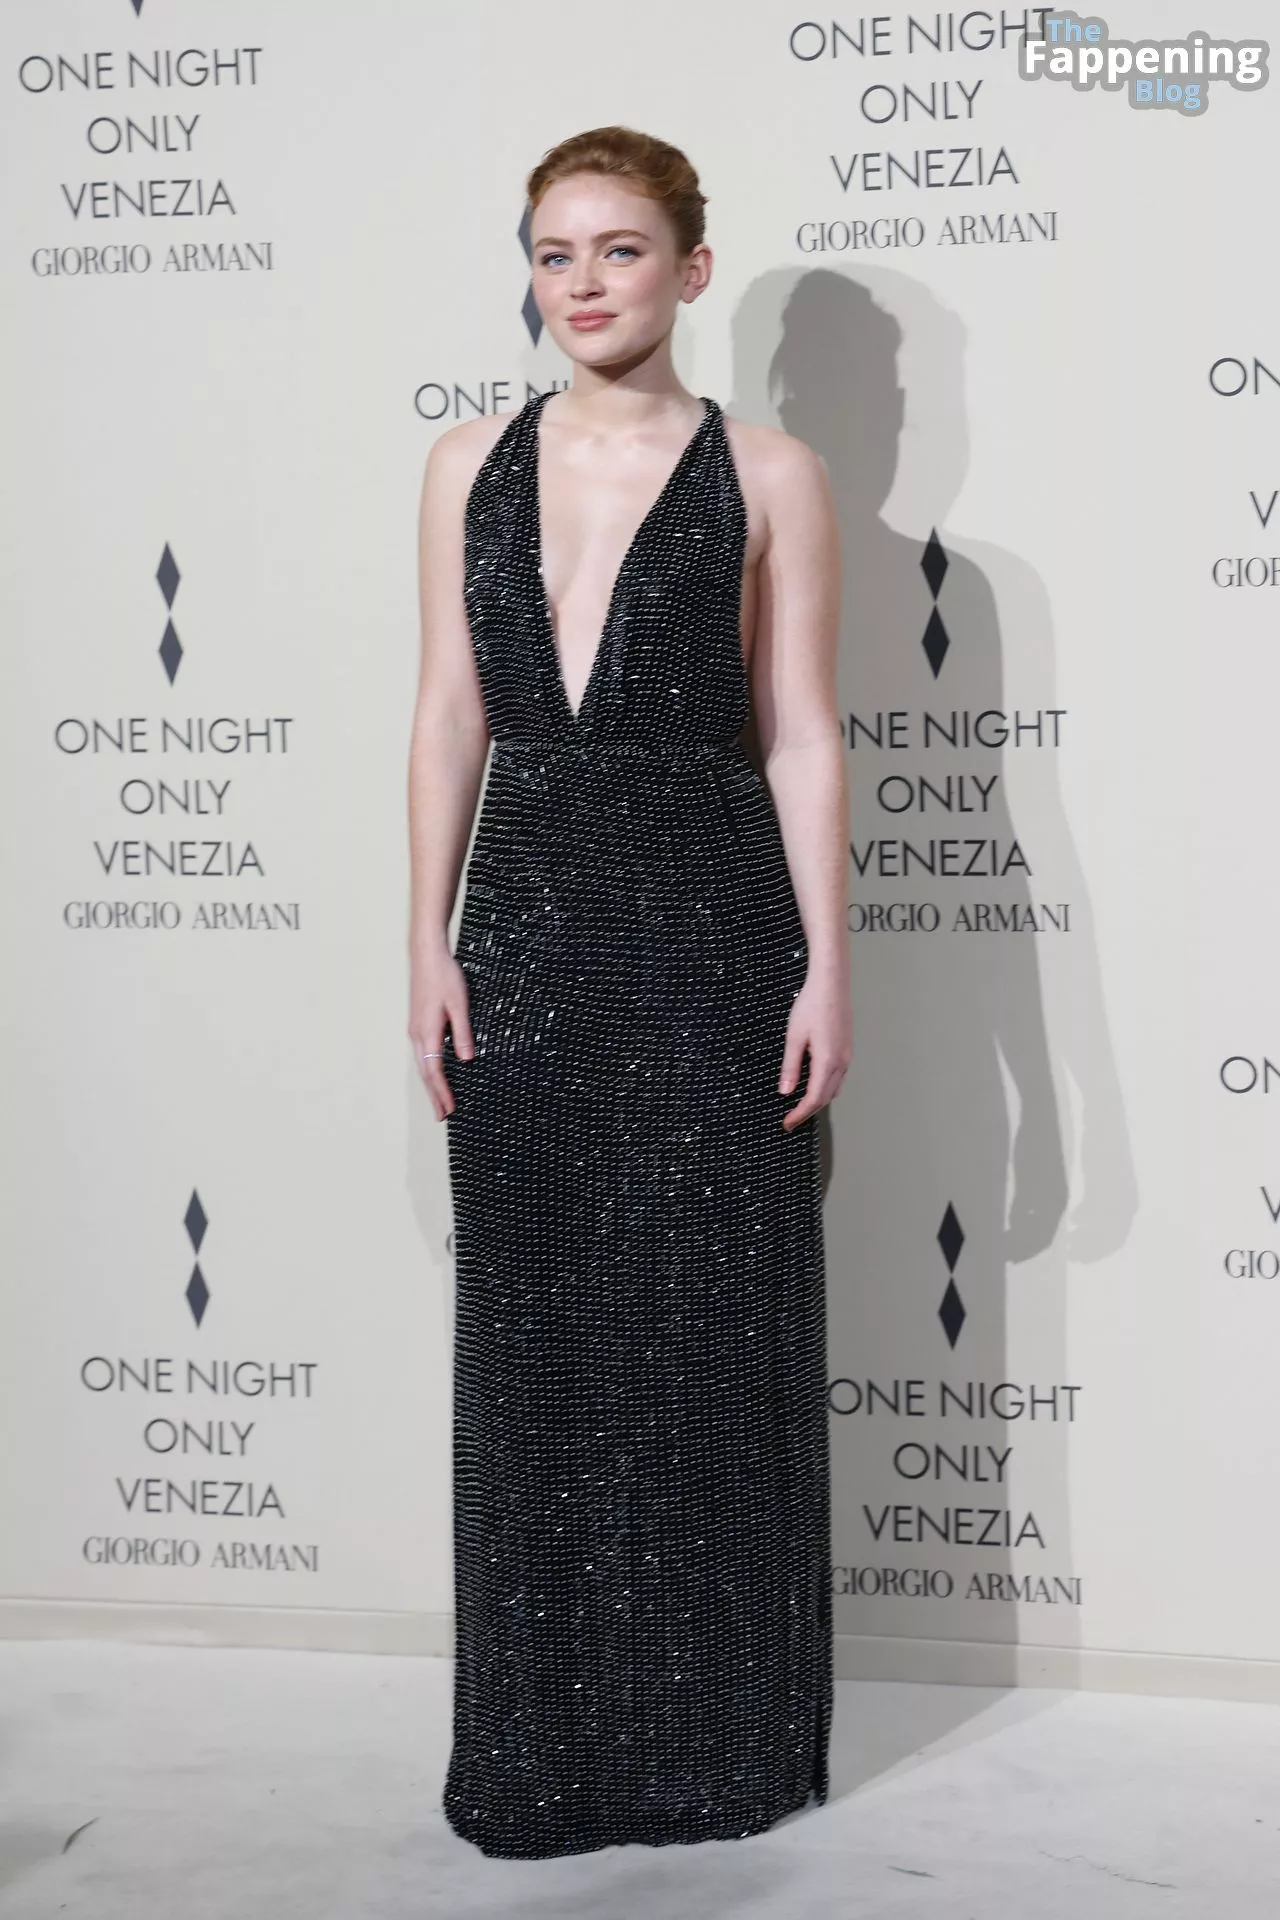 Sadie Sink Looks Beautiful at the Giorgio Armani “One Night In Venice” Photocall in Italy (15 Photos + Video)